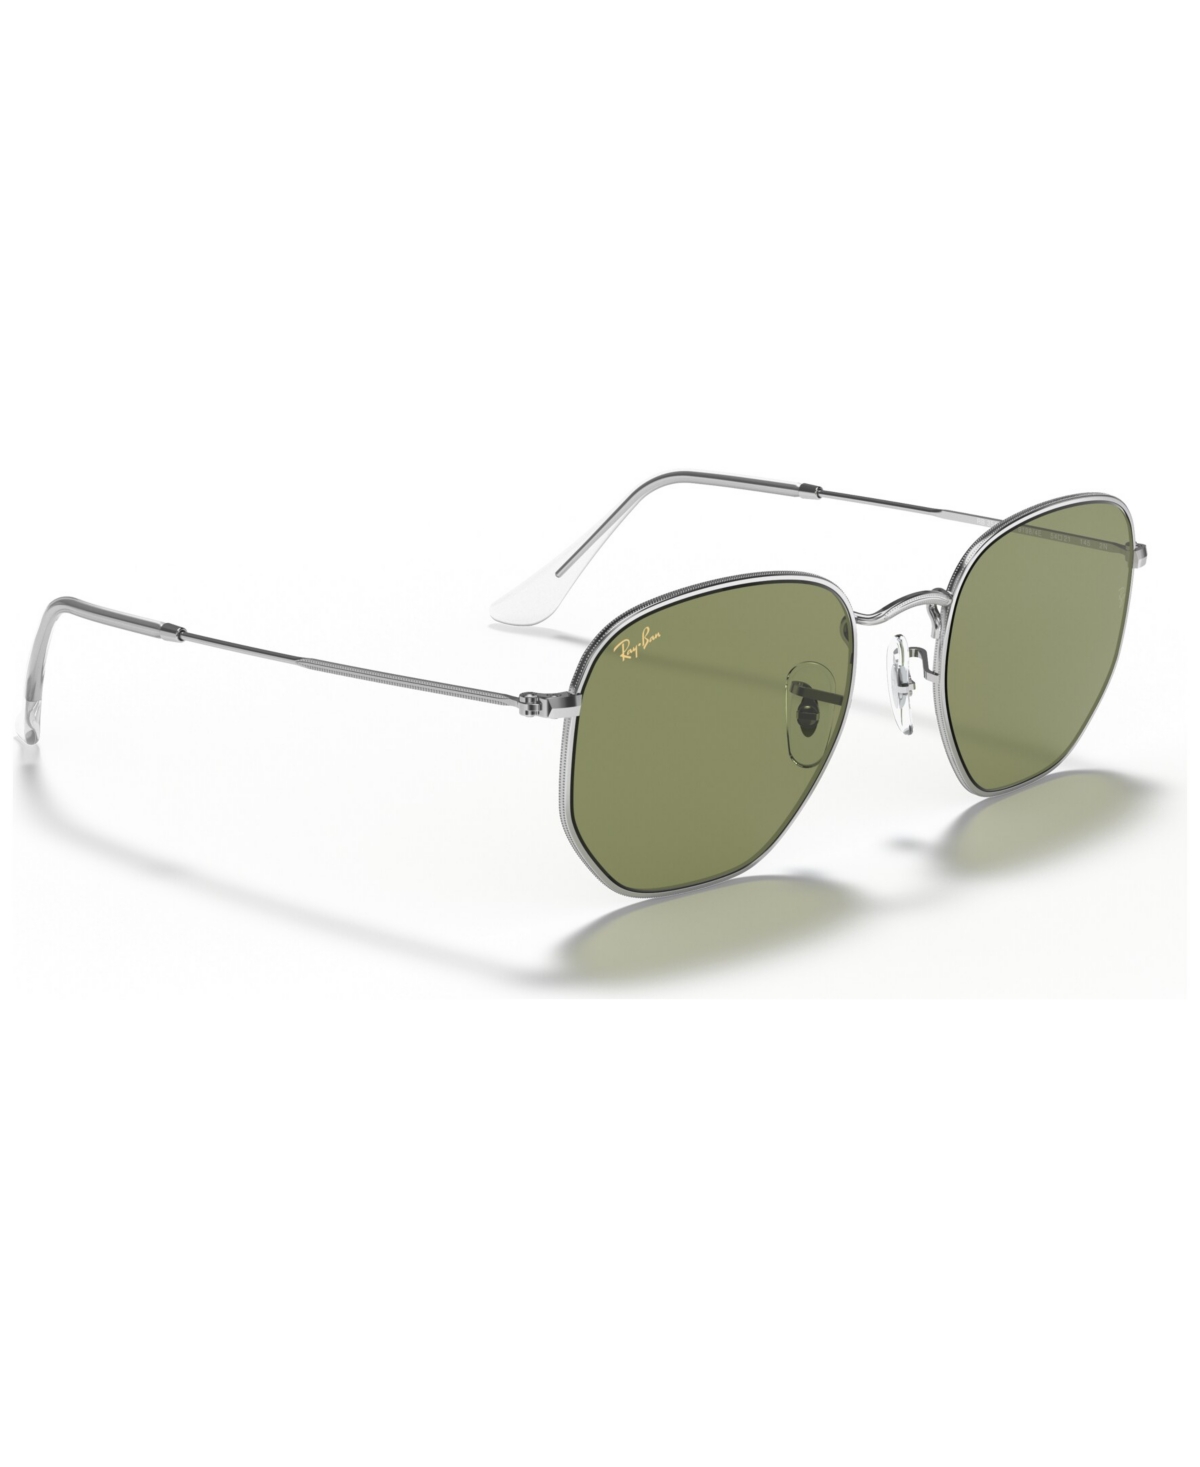 Ray Ban Unisex Hexagonal Sunglasses, Rb3548l In Silver